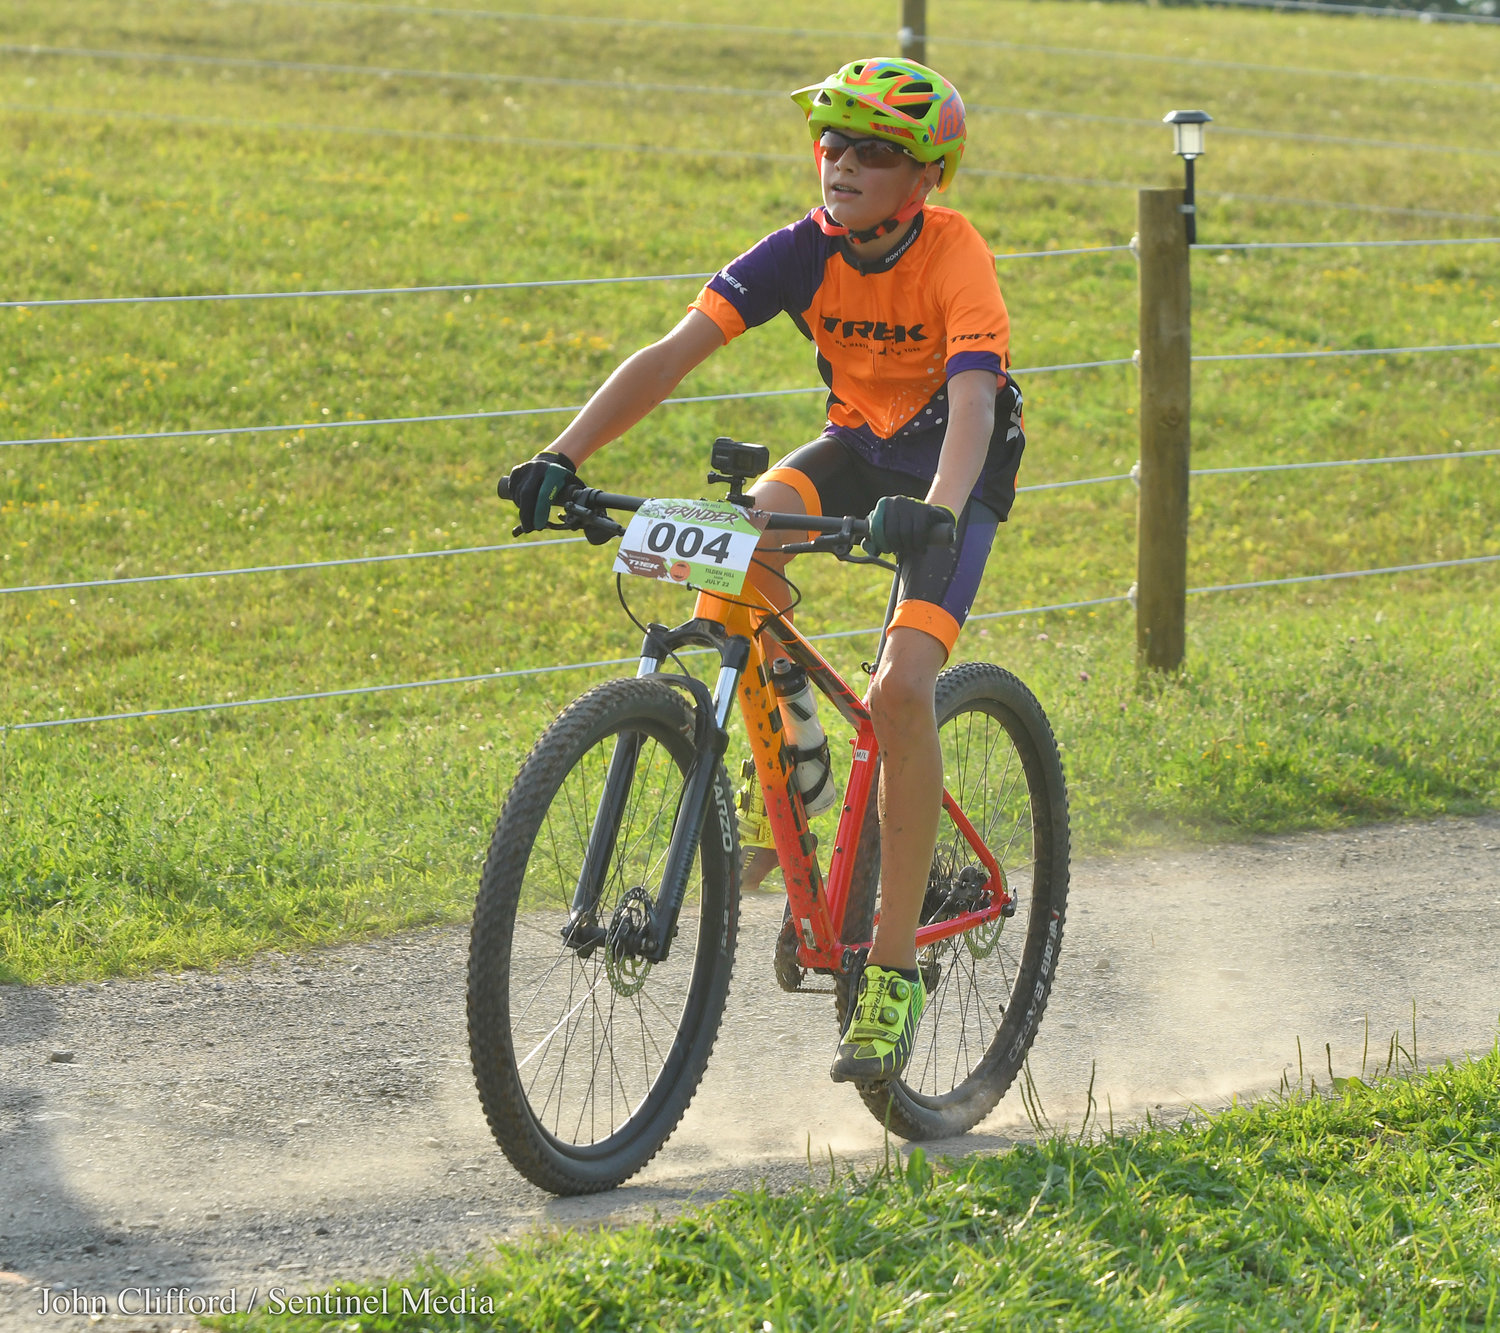 Tilden Hill Grinder series bike racing participant Wyatt Kimball from Sauquoit, pedals to the finish line during the 30 minute race Wednesday night in Vernon.